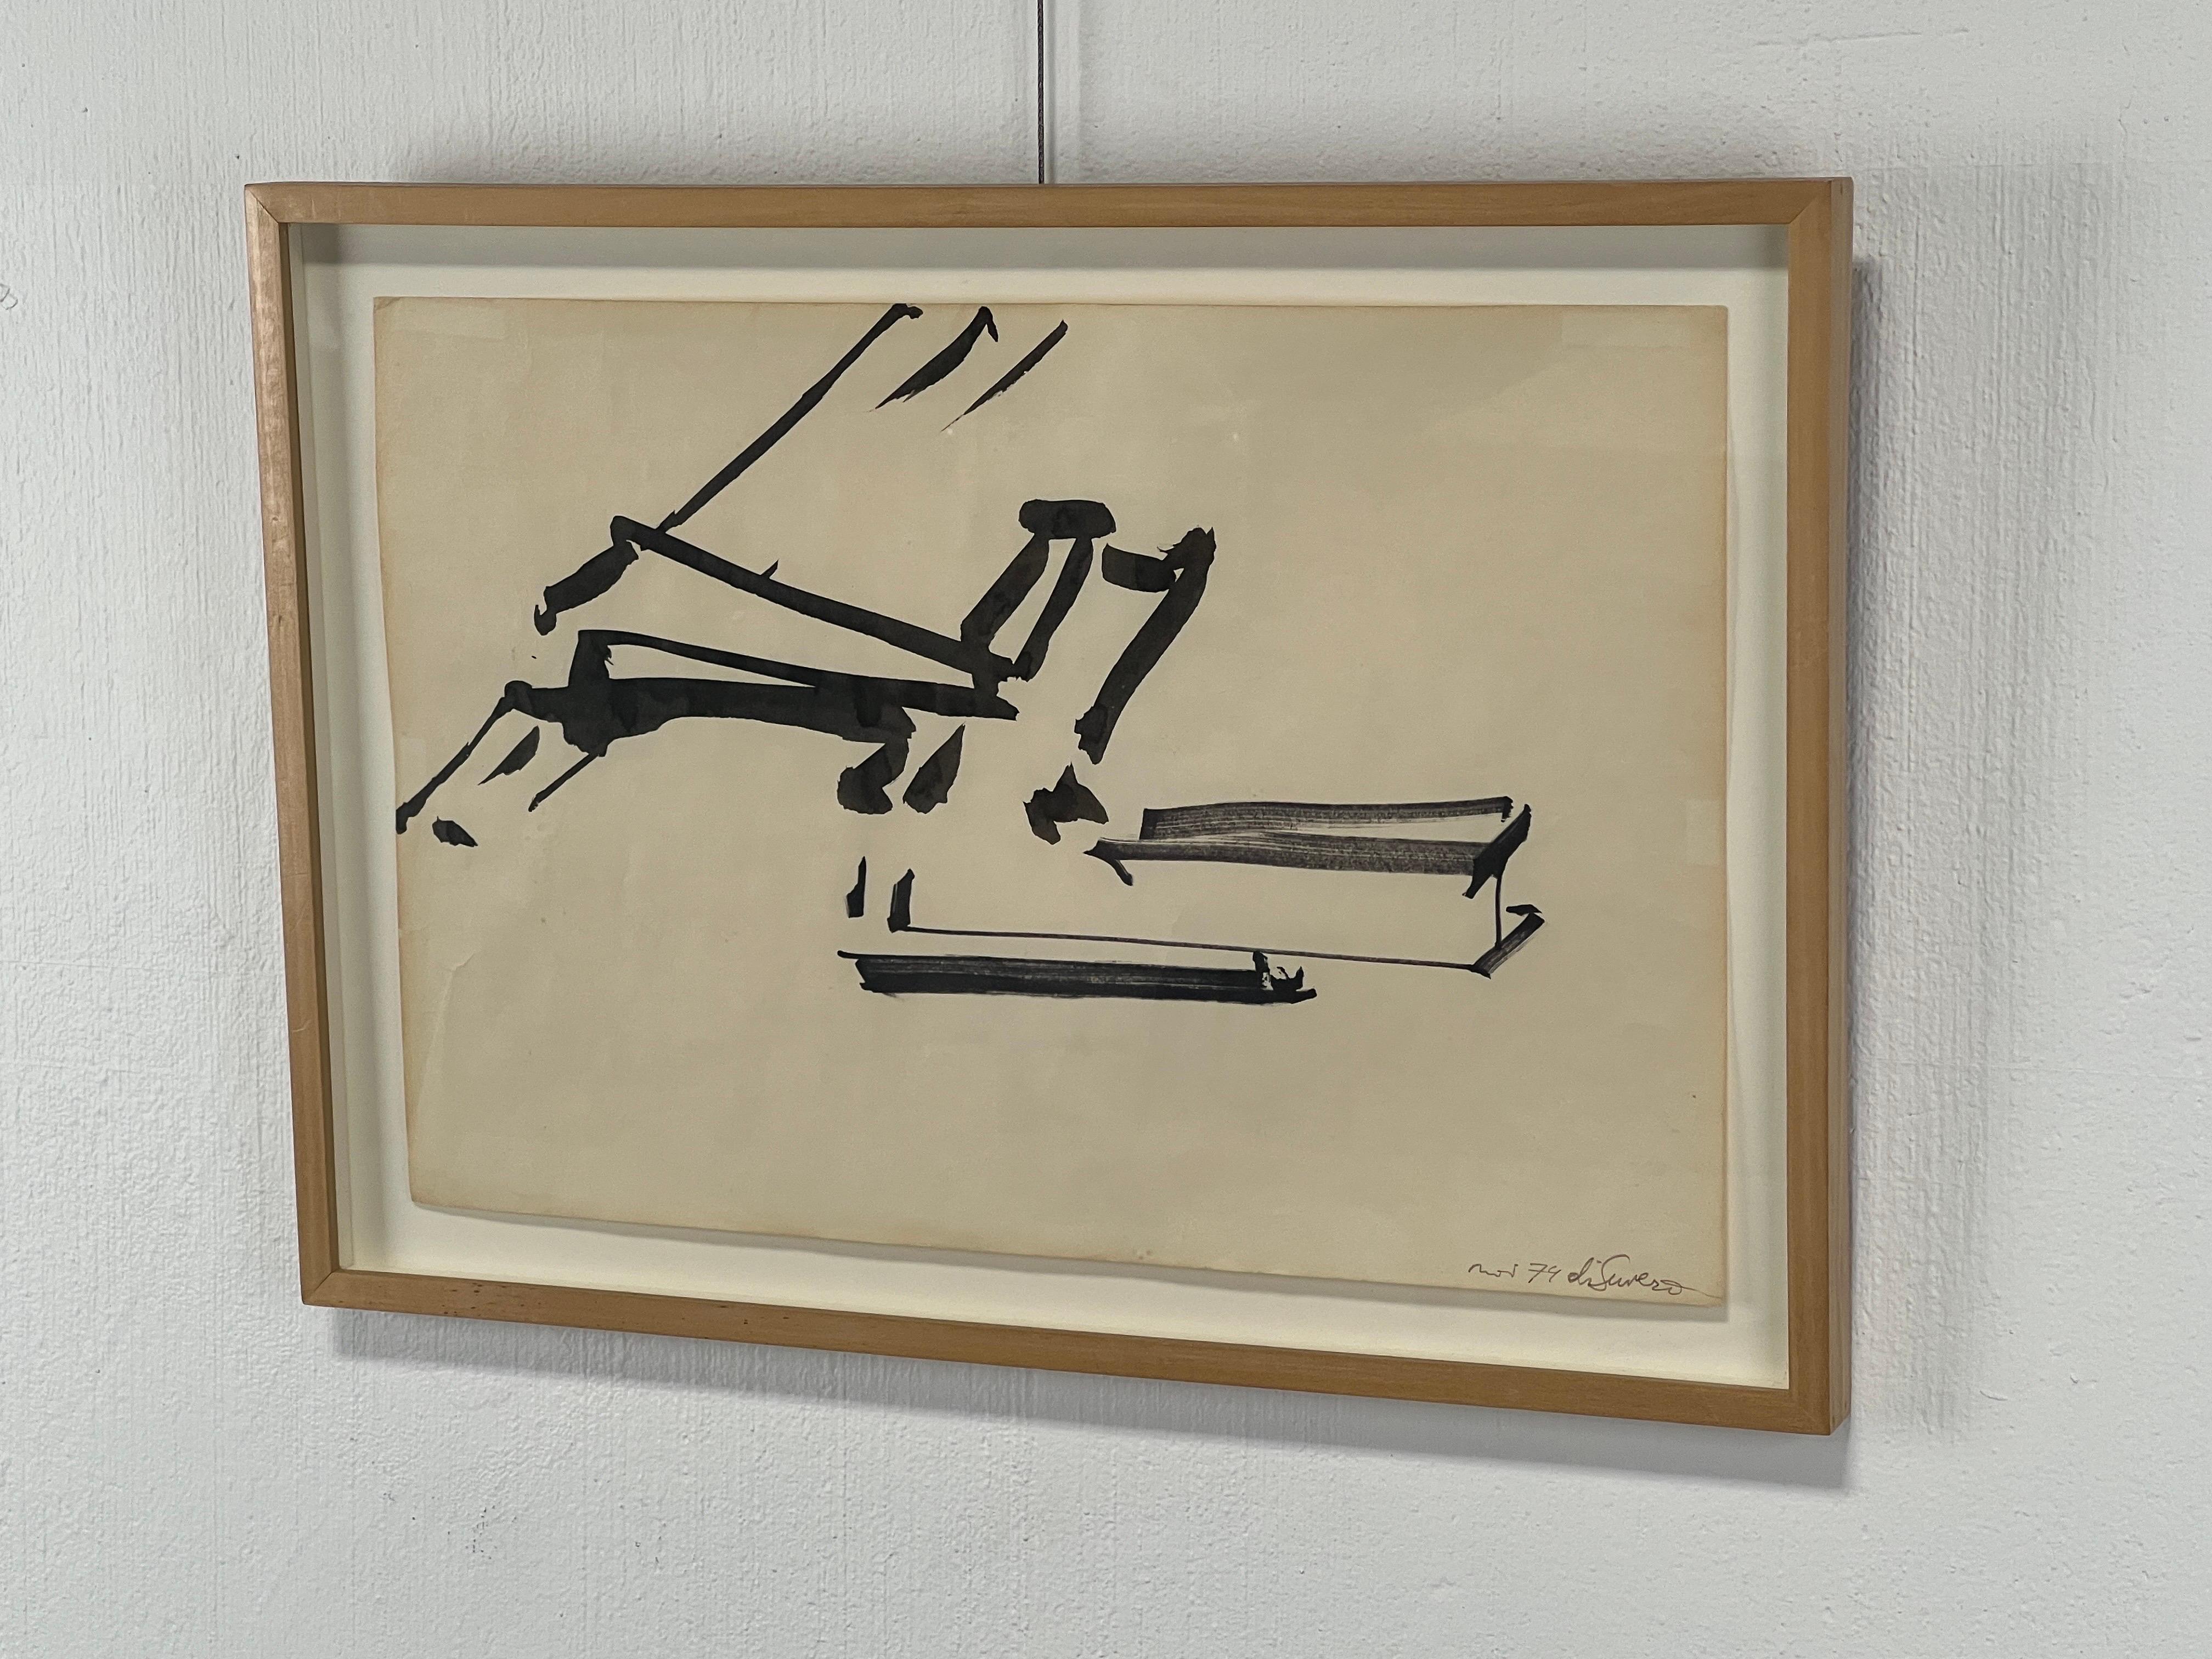 Untitled Ink Drawing on Paper, 1974, by Mark di Suvero  For Sale 2